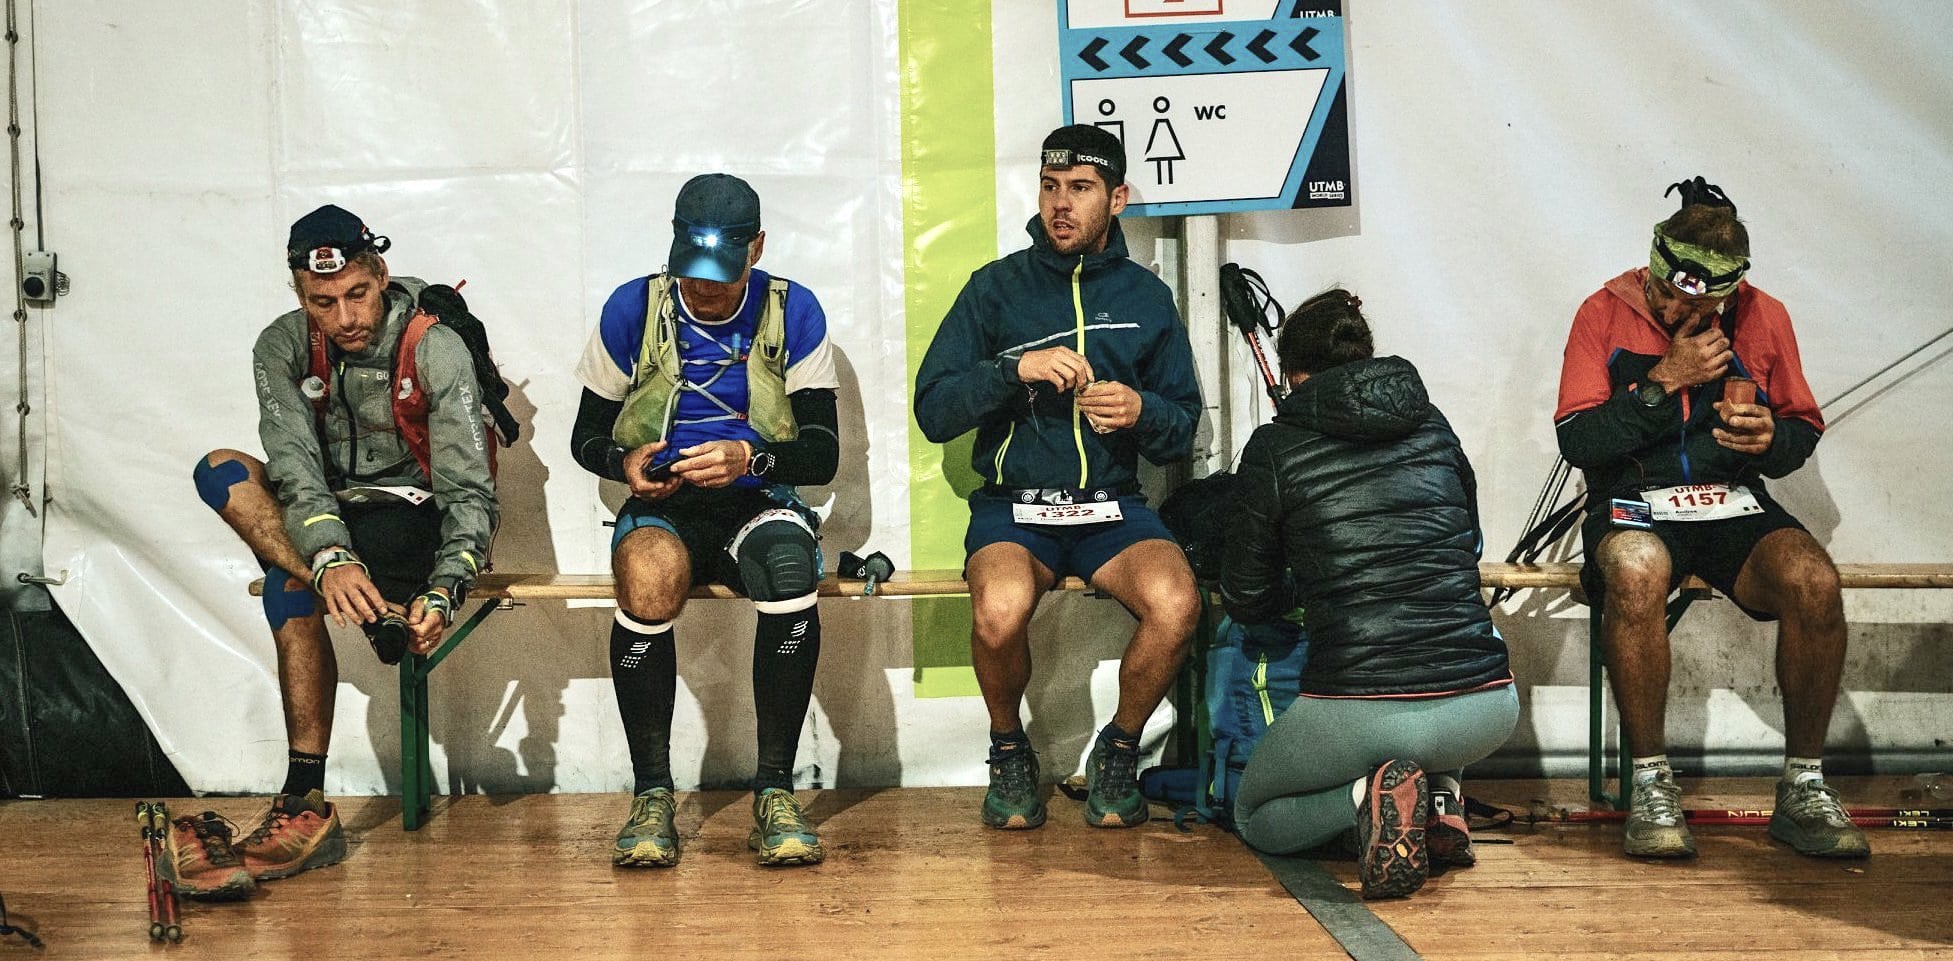 UTMB runners on a bench in an aid station, eating, sorting gear and checking feet.